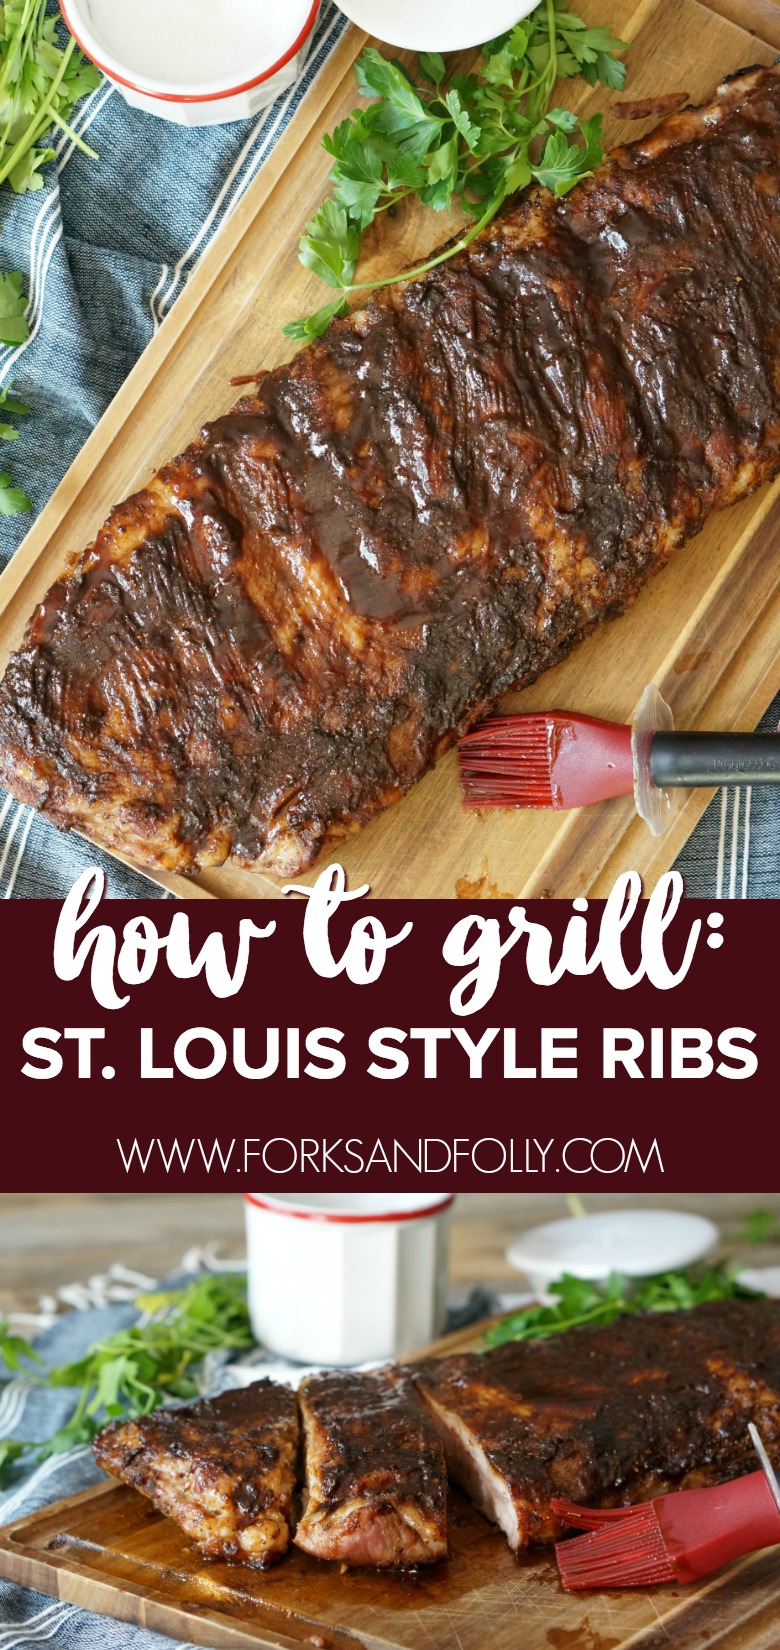 Grilled St. Louis Style Ribs with DIY Spice Rub - Forks and Folly